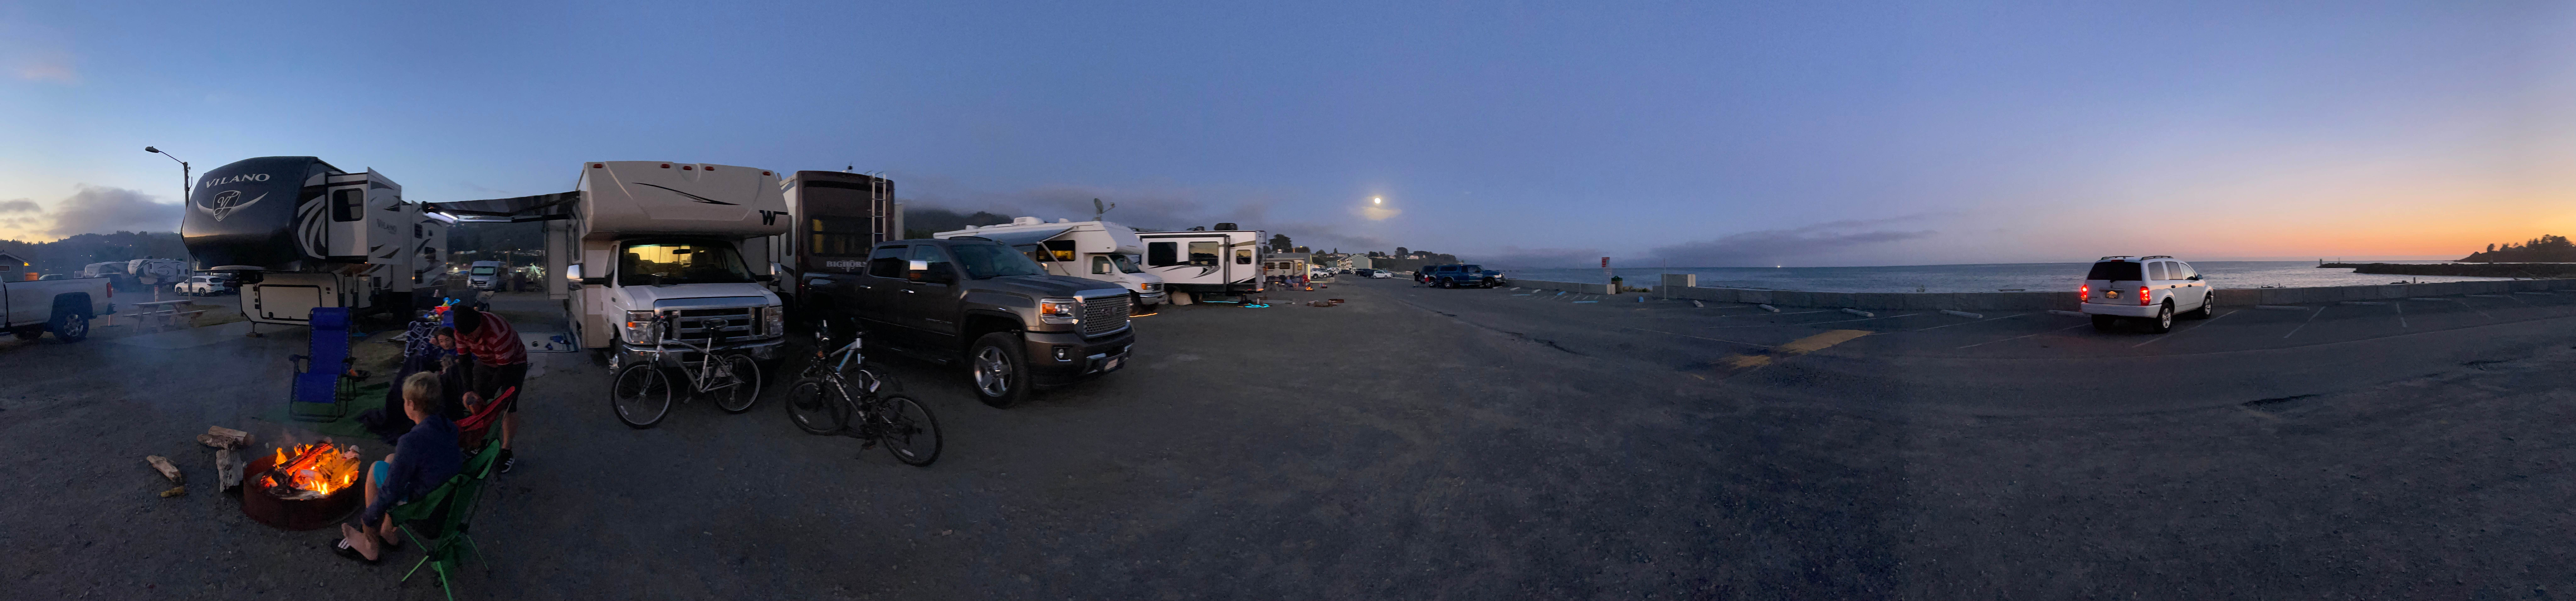 Camper submitted image from Beachfront RV Park - 3